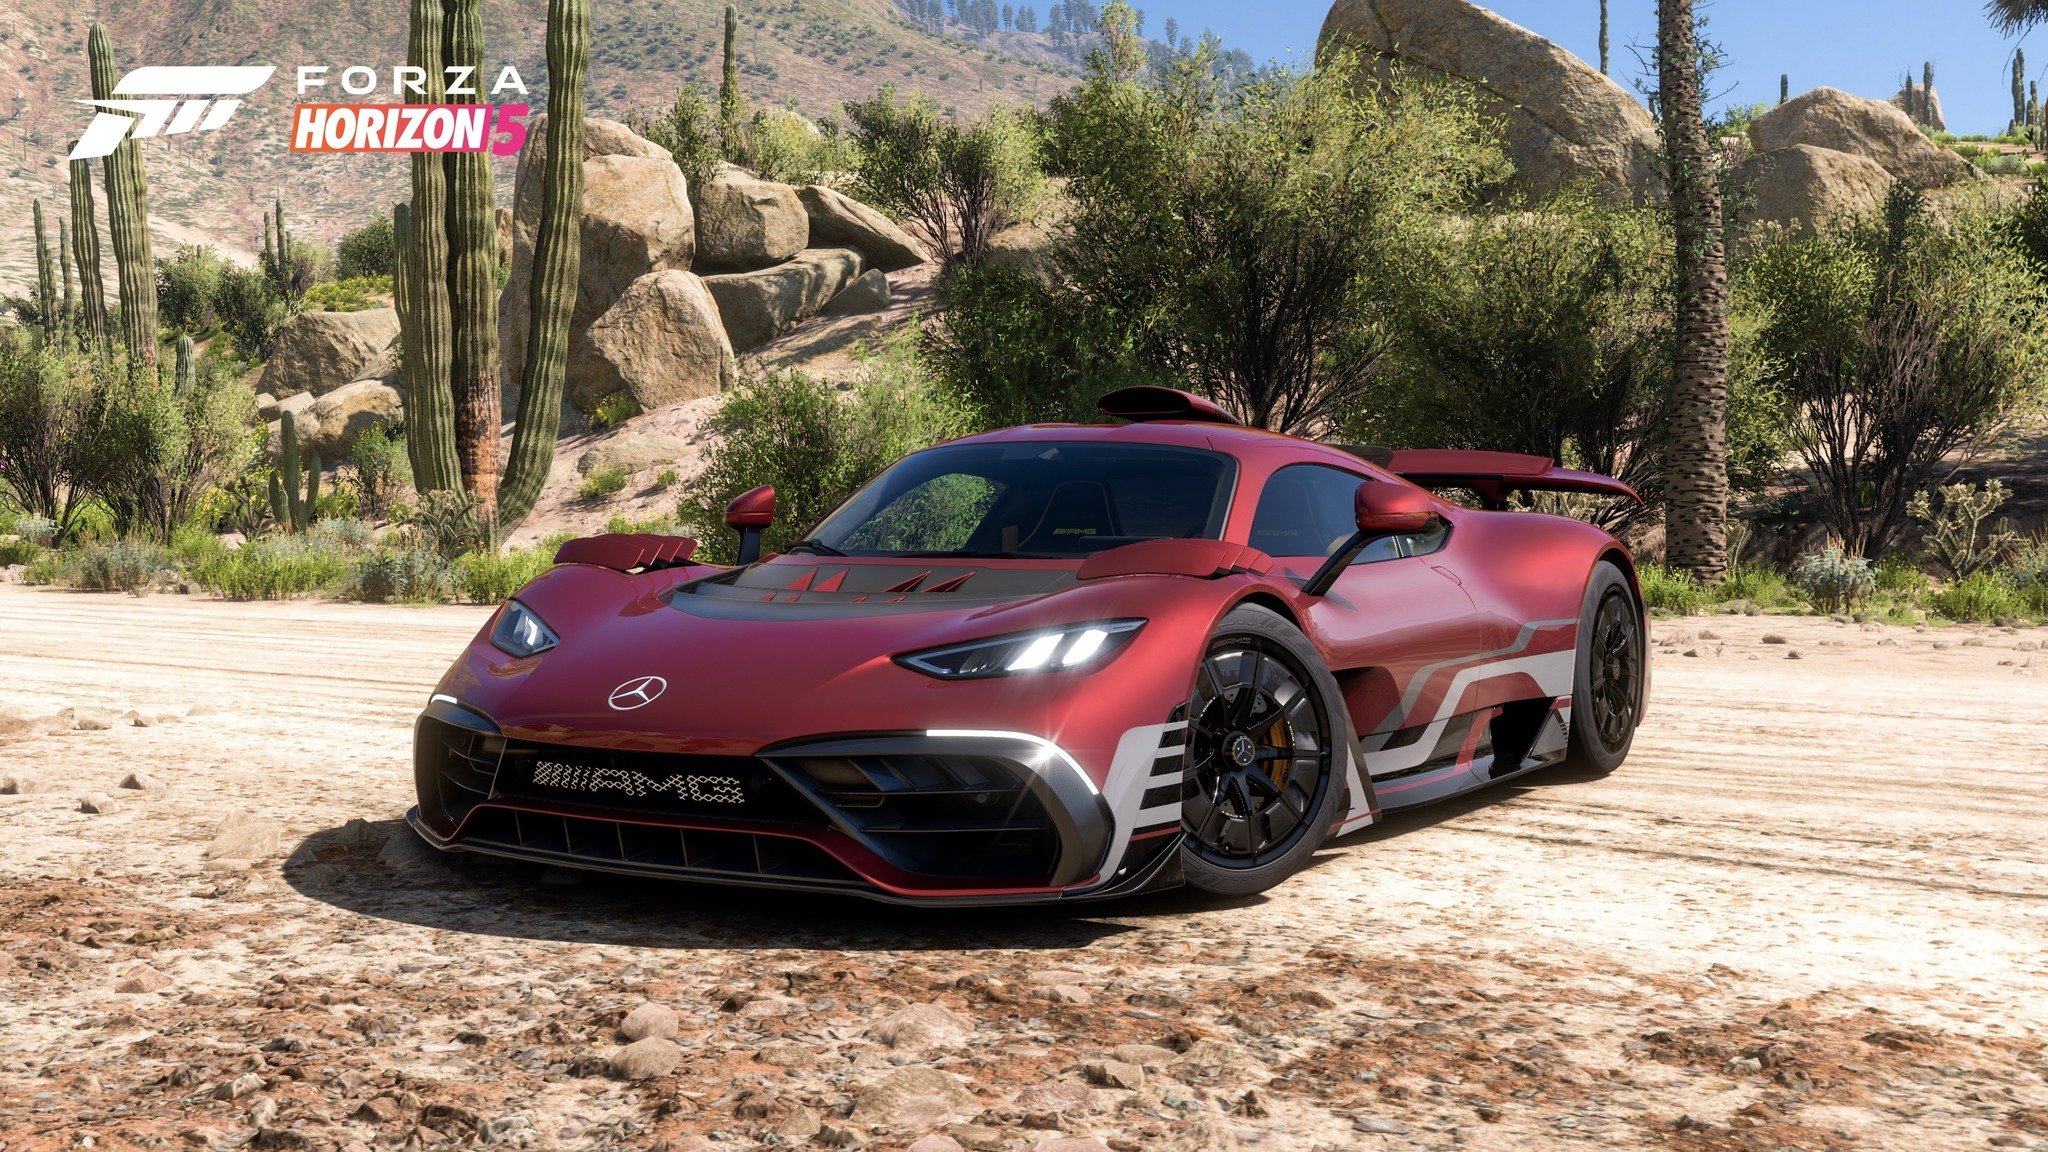 The next Forza Horizon 5 update will include brand-new German vehicles, Gamers Rumble, gamersrumble.com